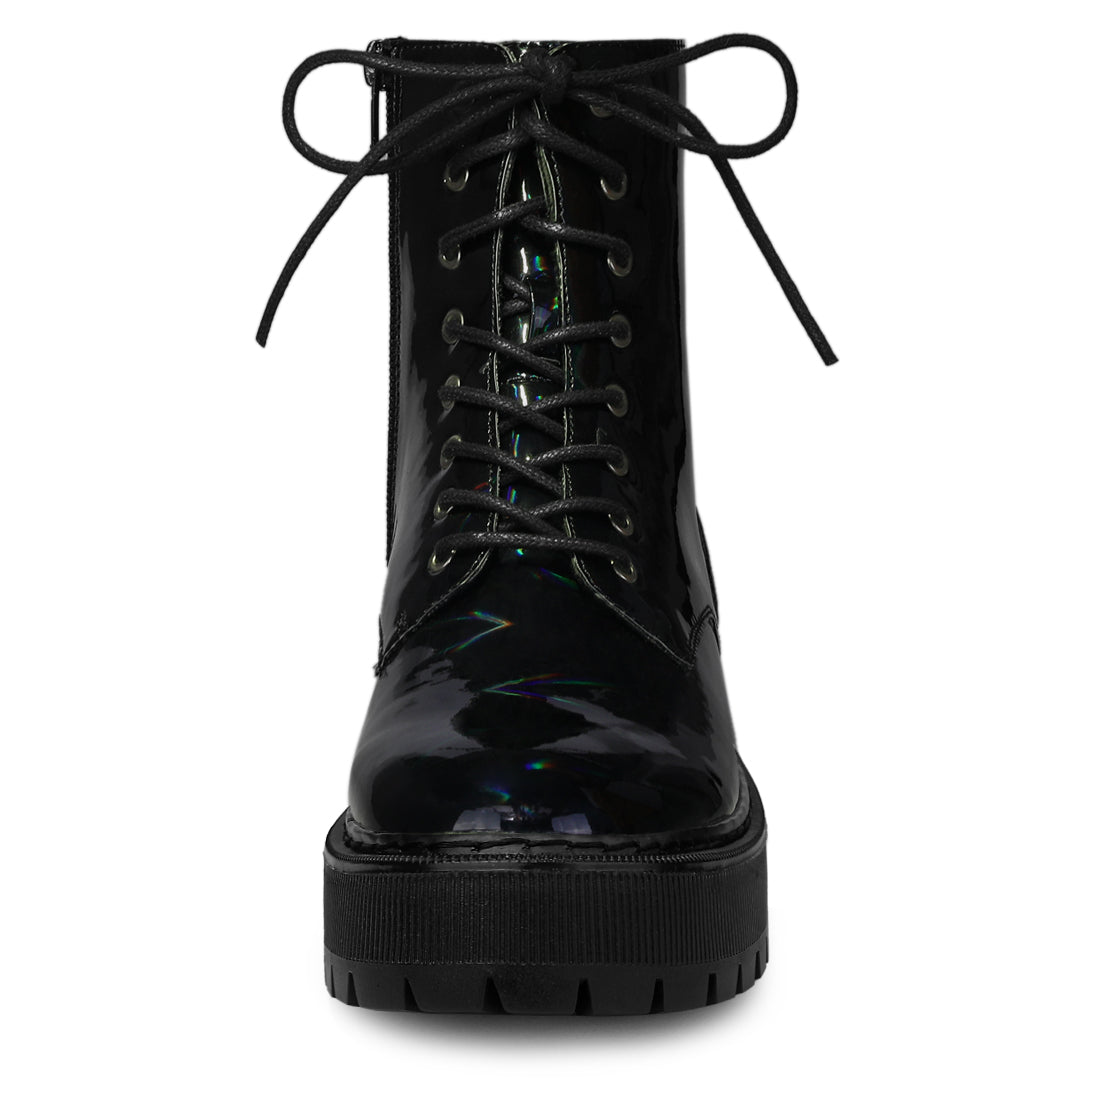 Allegra K Round Toe Platform Lace Up Colorful Combat Ankle Boots